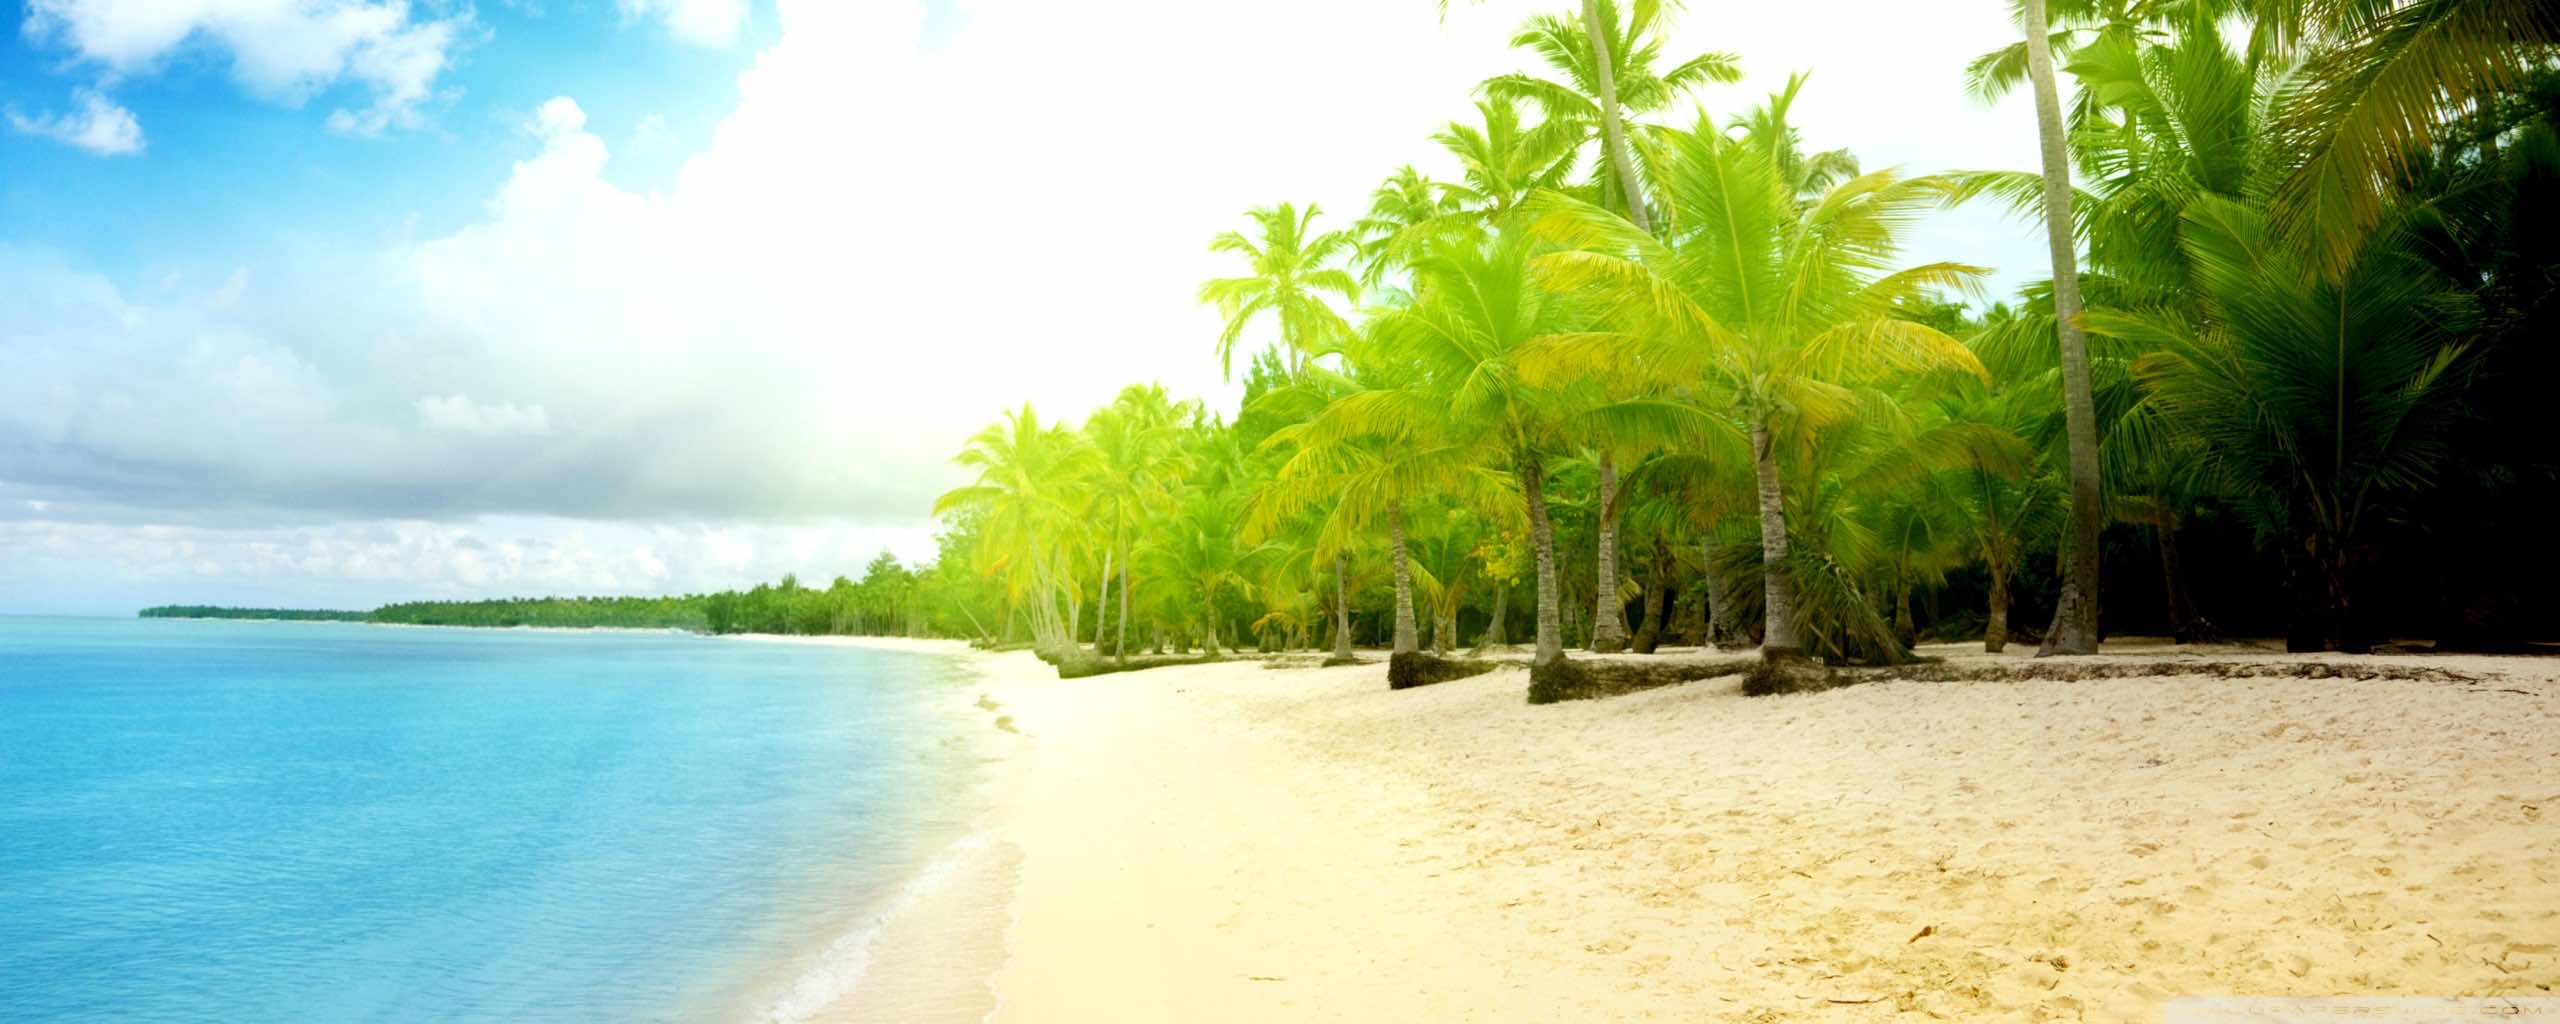 45 Beach Wallpaper For Mobile And Desktop In Full HD For Dow